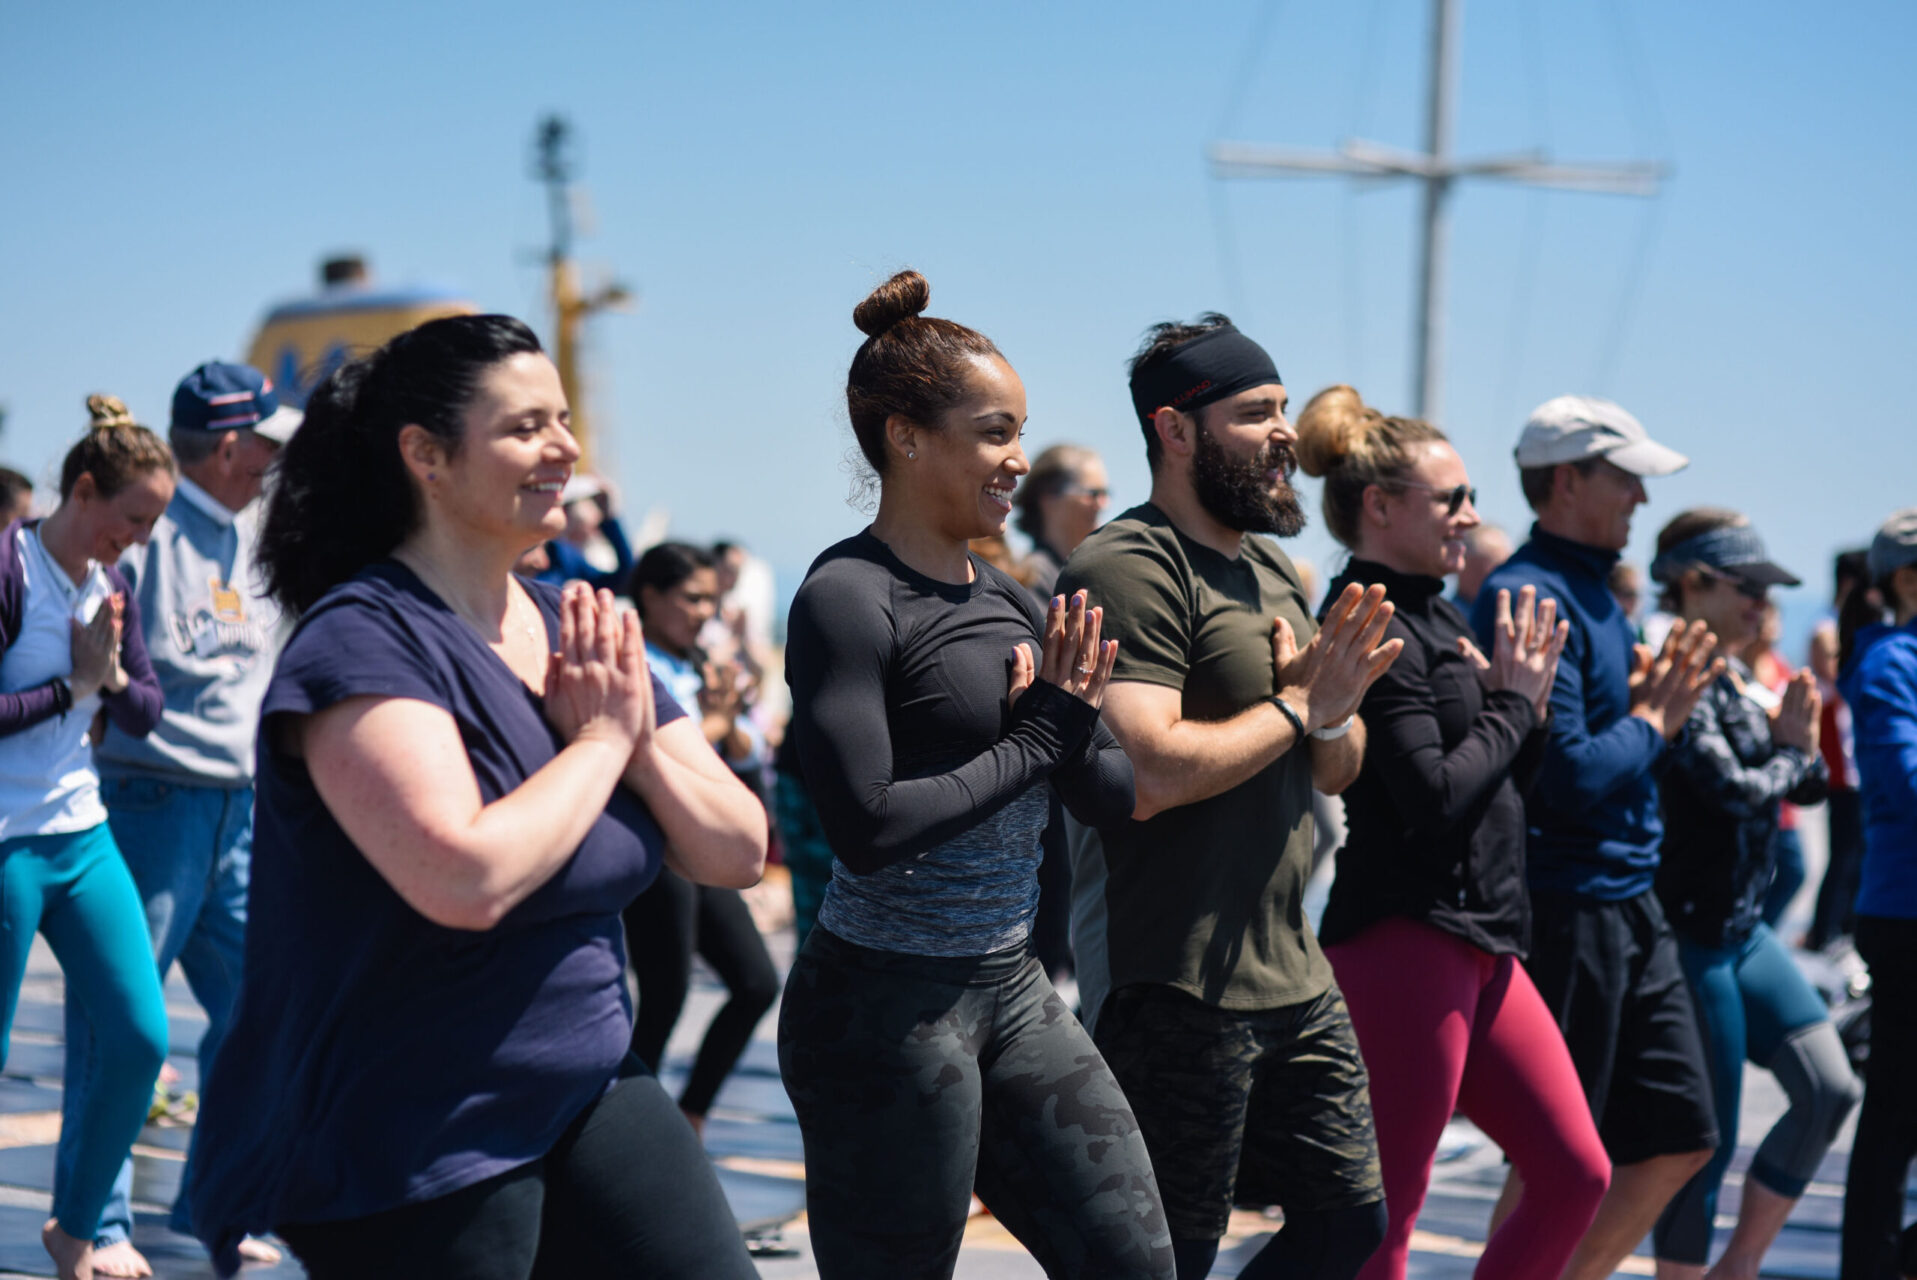 veterans yoga project - yoga on aircraft carrier